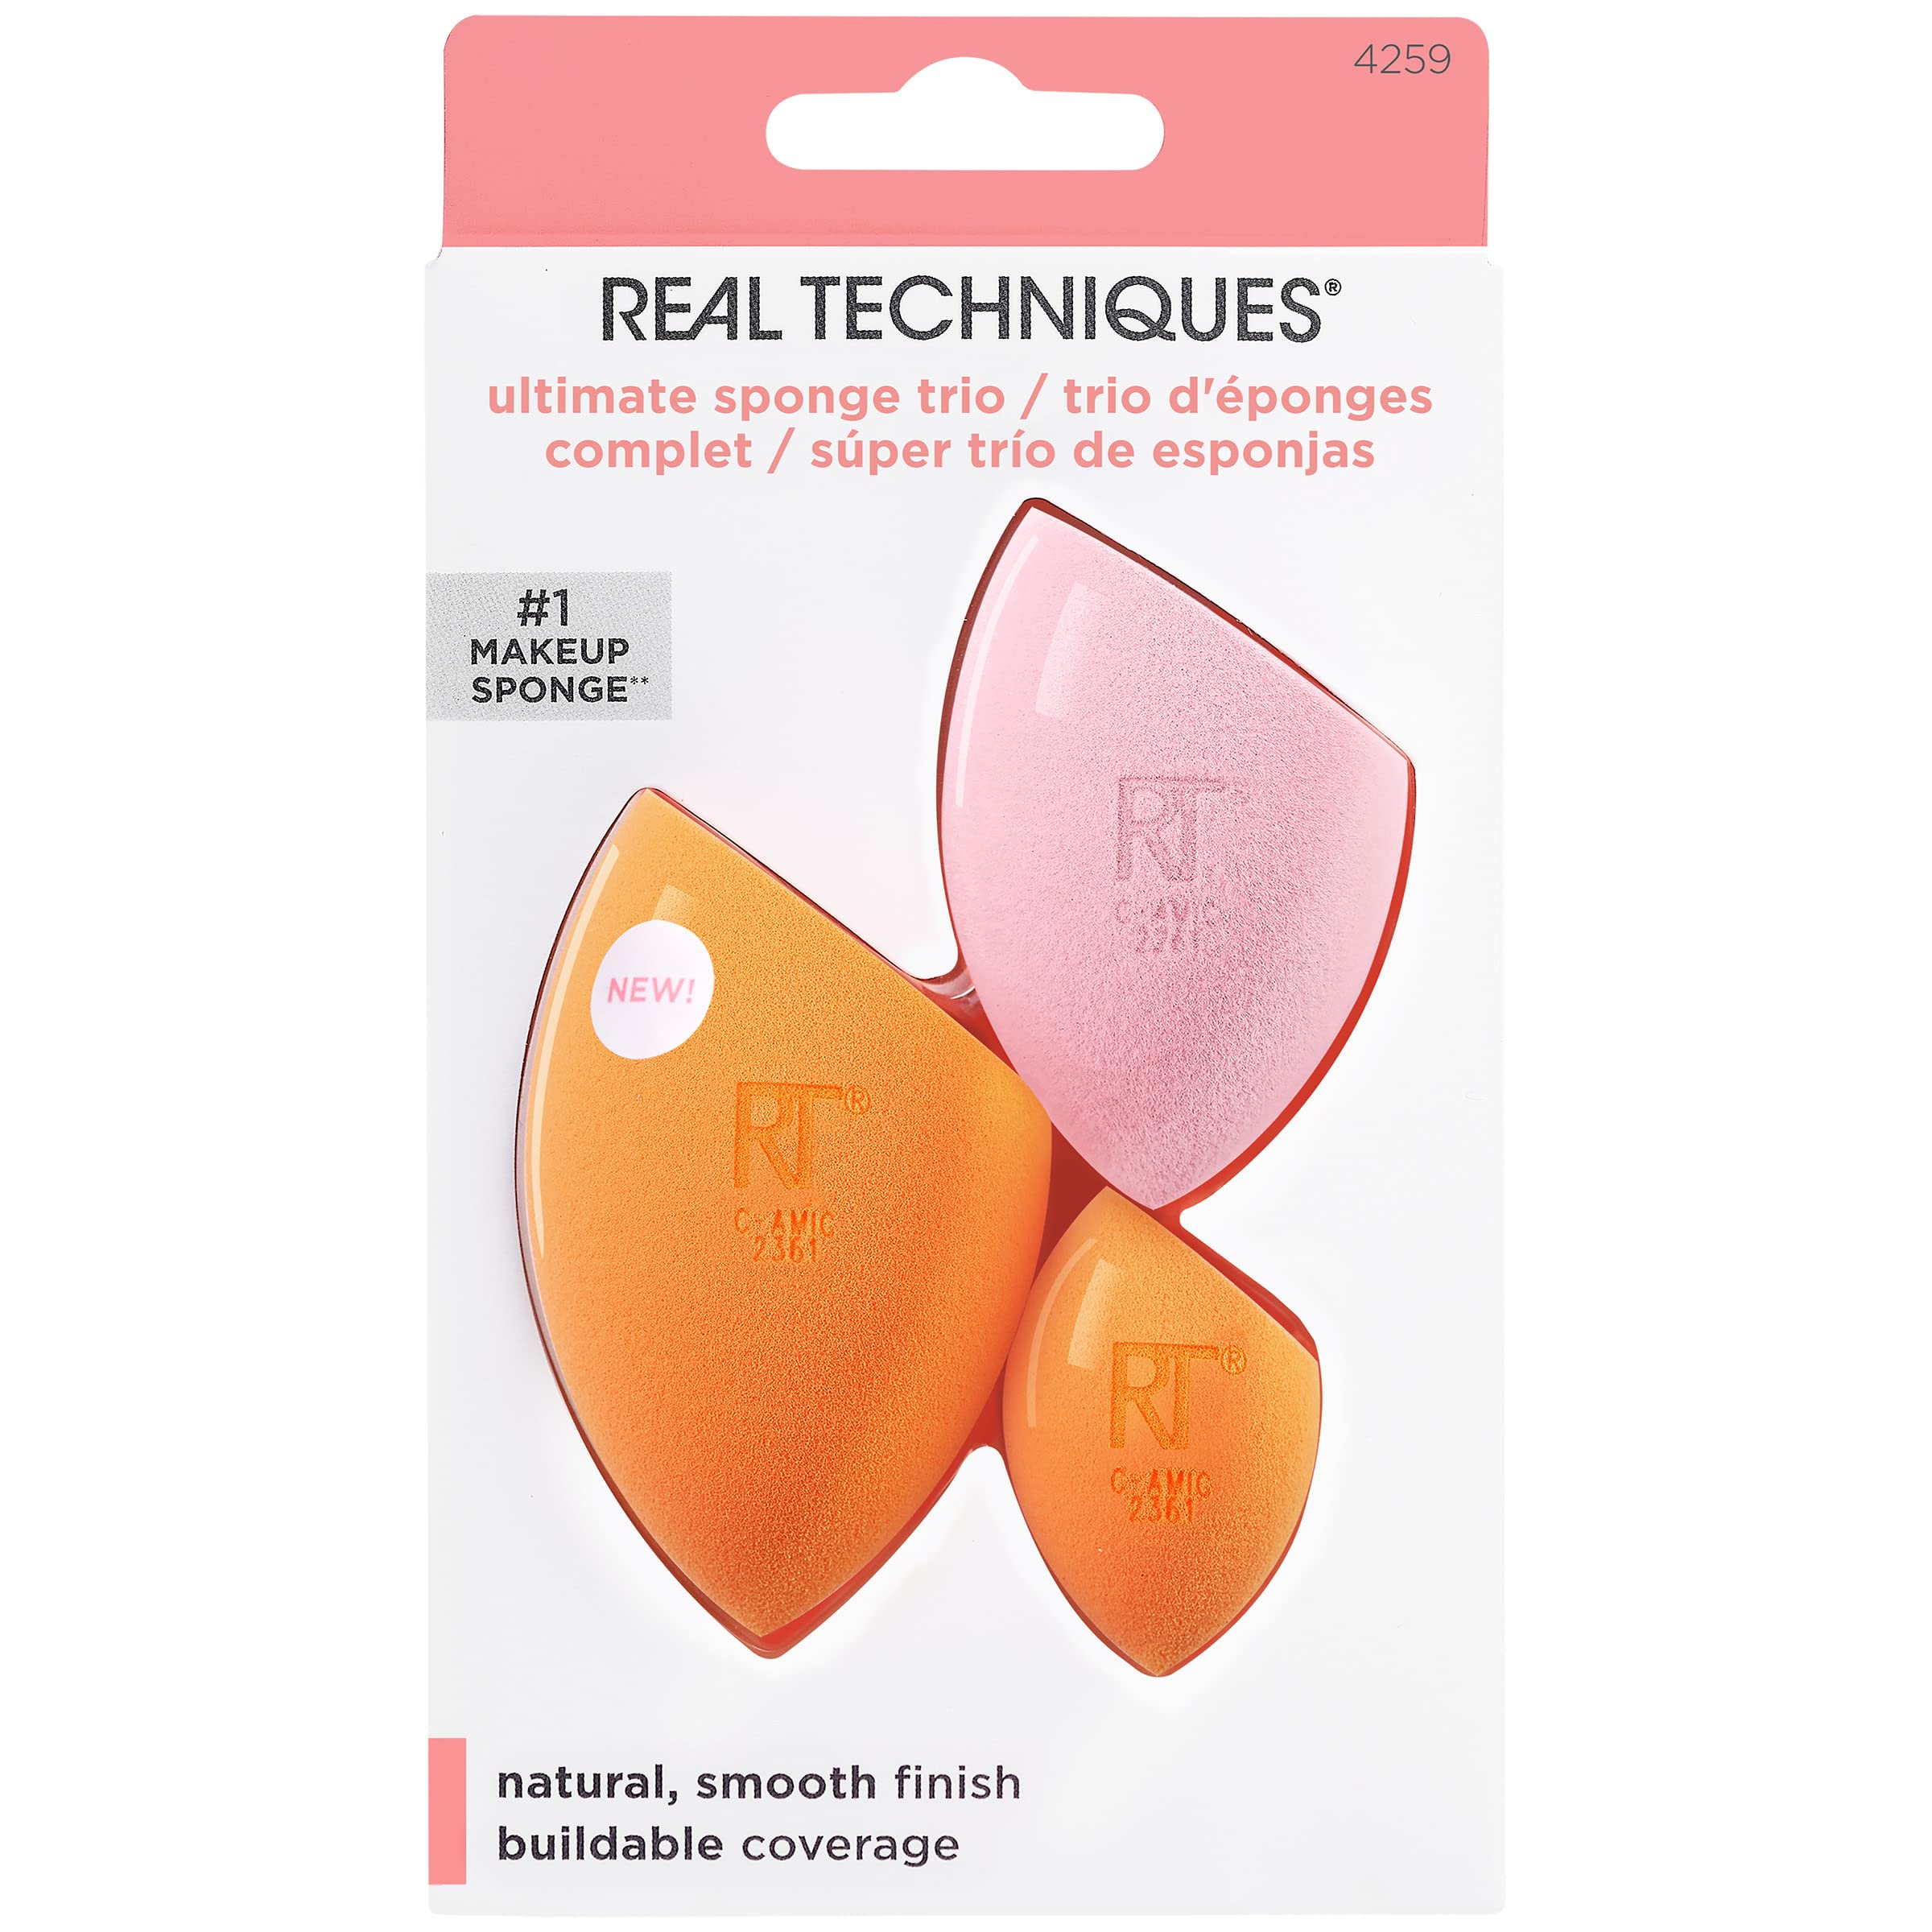 REAL TECHNIQUES Chroma Miracle Complexion & Miracle Powder Makeup Blending Sponges, For Liquid Foundation and Setting Powder, 2 Count, Multicolor